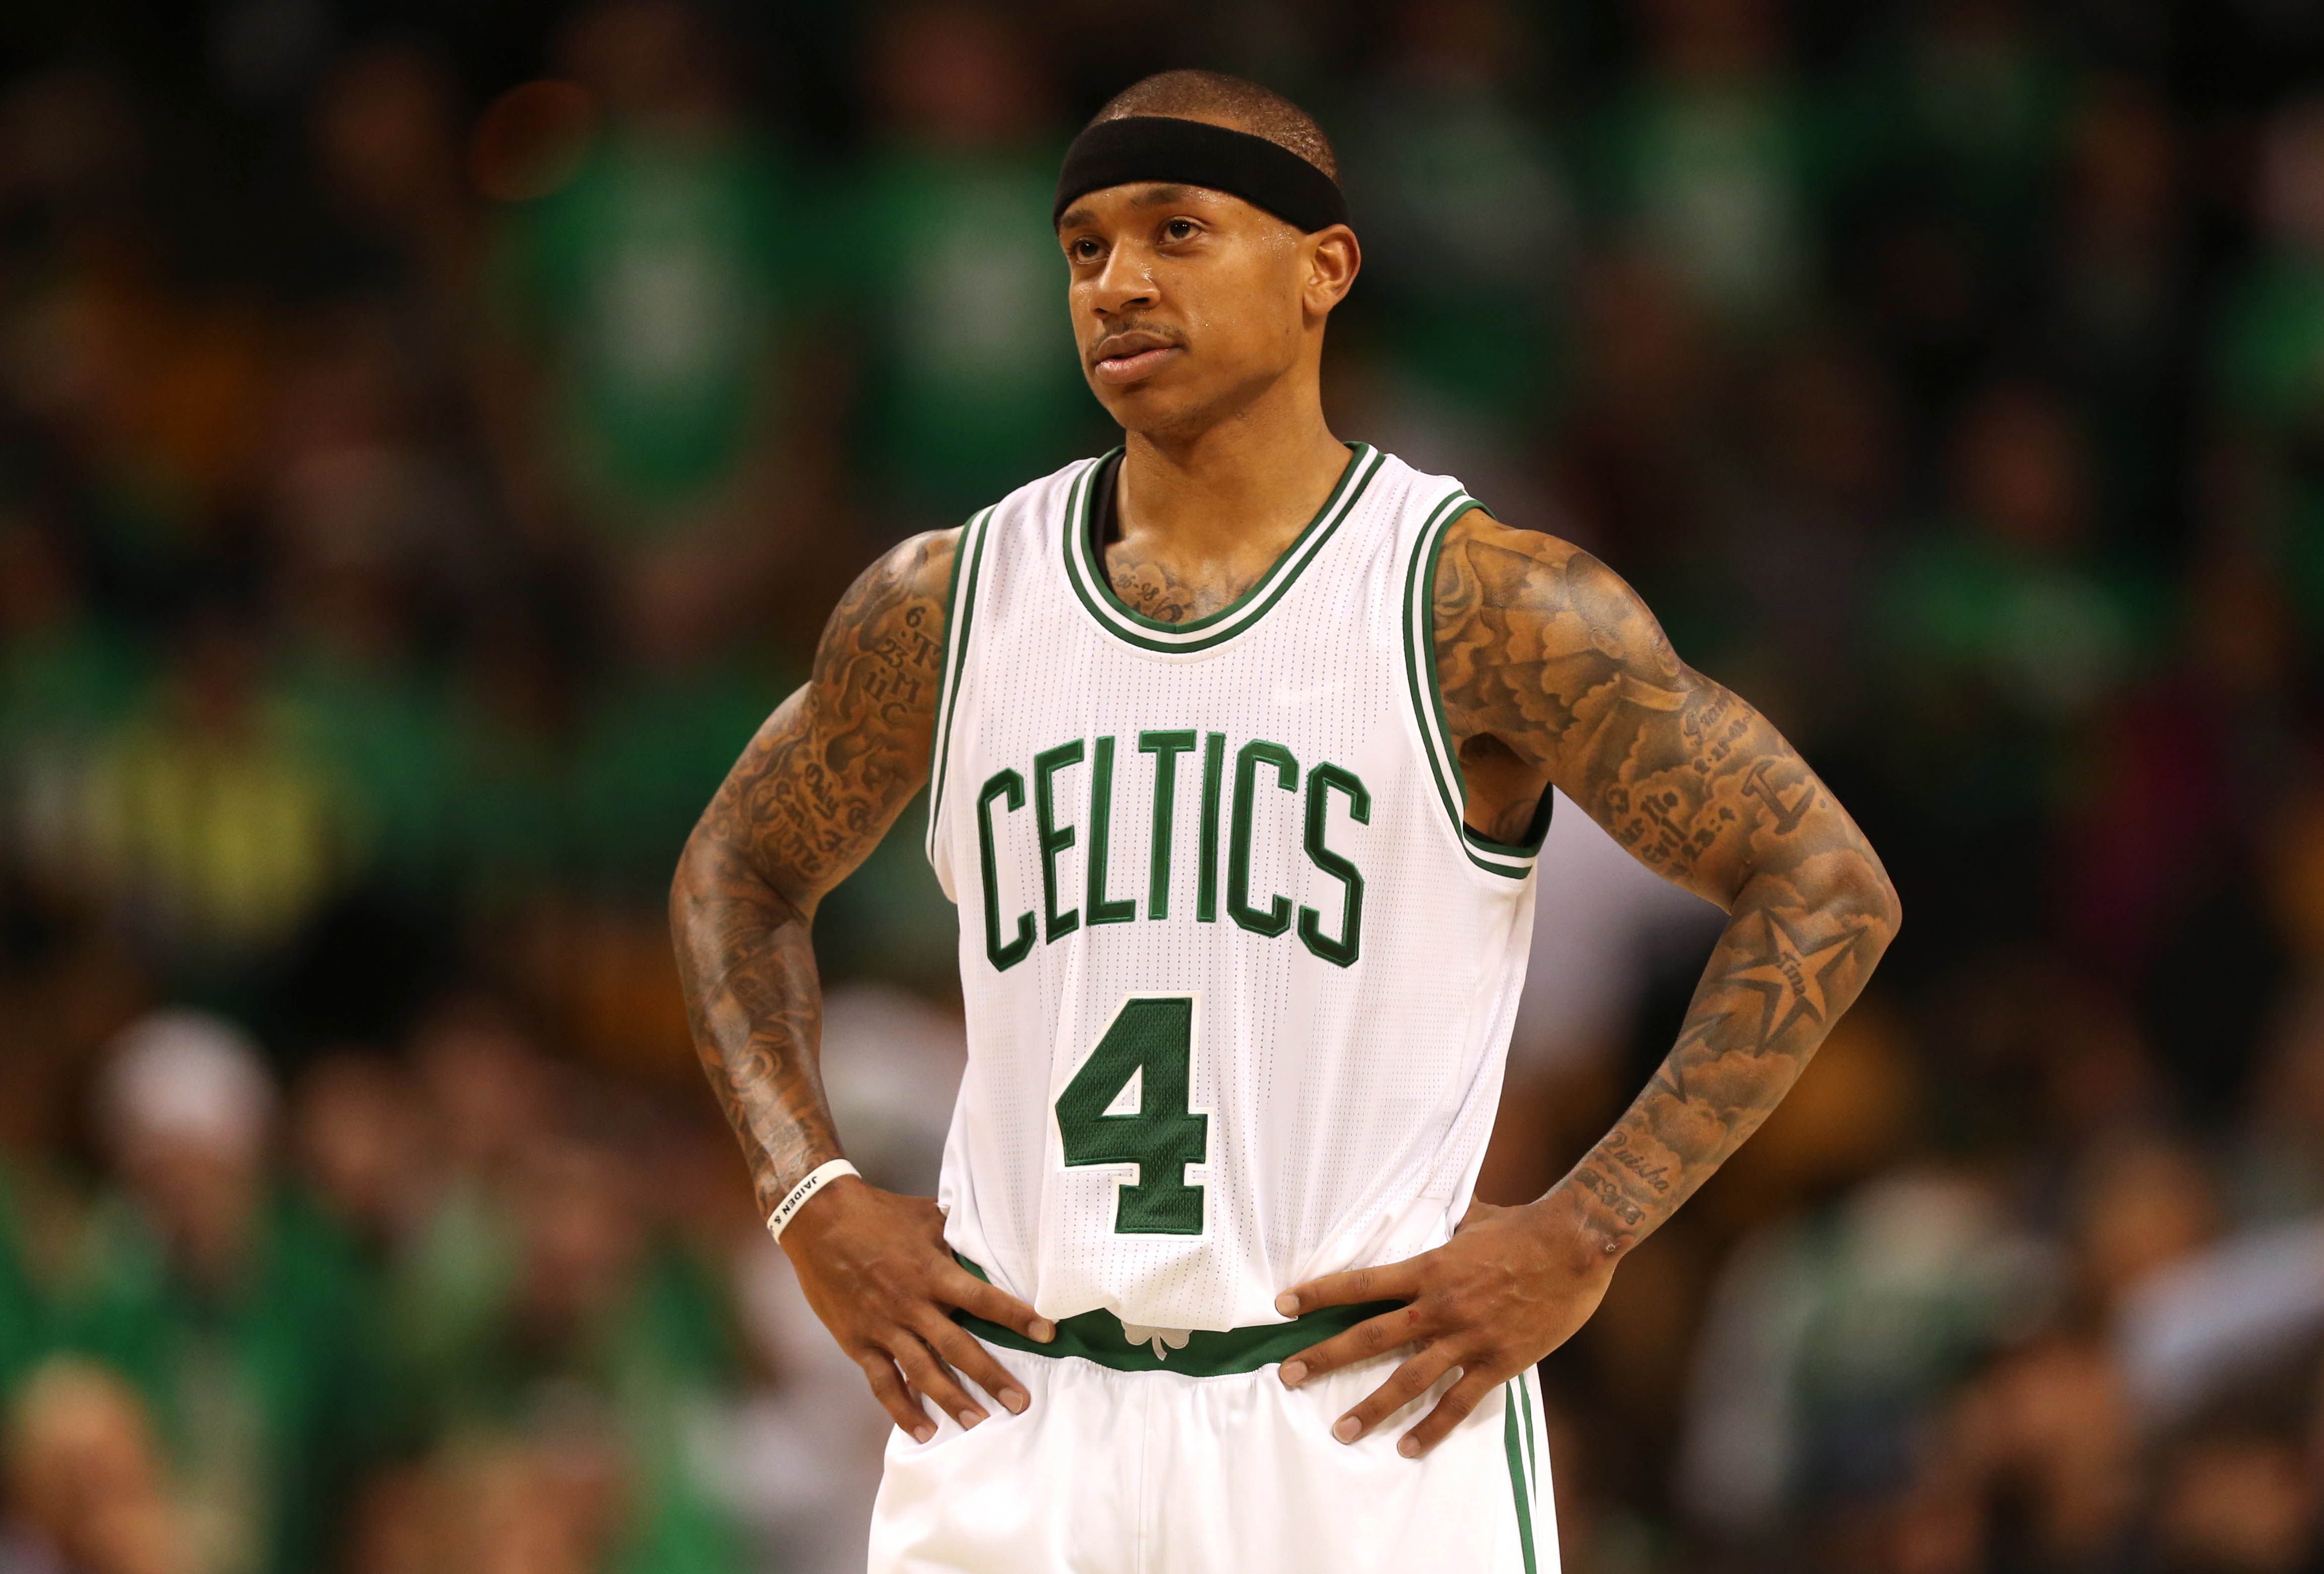 Apr 28, 2016; Boston, MA, USA; Boston Celtics guard Isaiah Thomas (4) reacts against the Atlanta Hawks during the second half in game six of the first round of the NBA Playoffs at TD Garden. Mandatory Credit: Mark L. Baer-USA TODAY Sports ORG XMIT: USATSI-268192 ORIG FILE ID: 20160428_sal_aa6_080.JPG